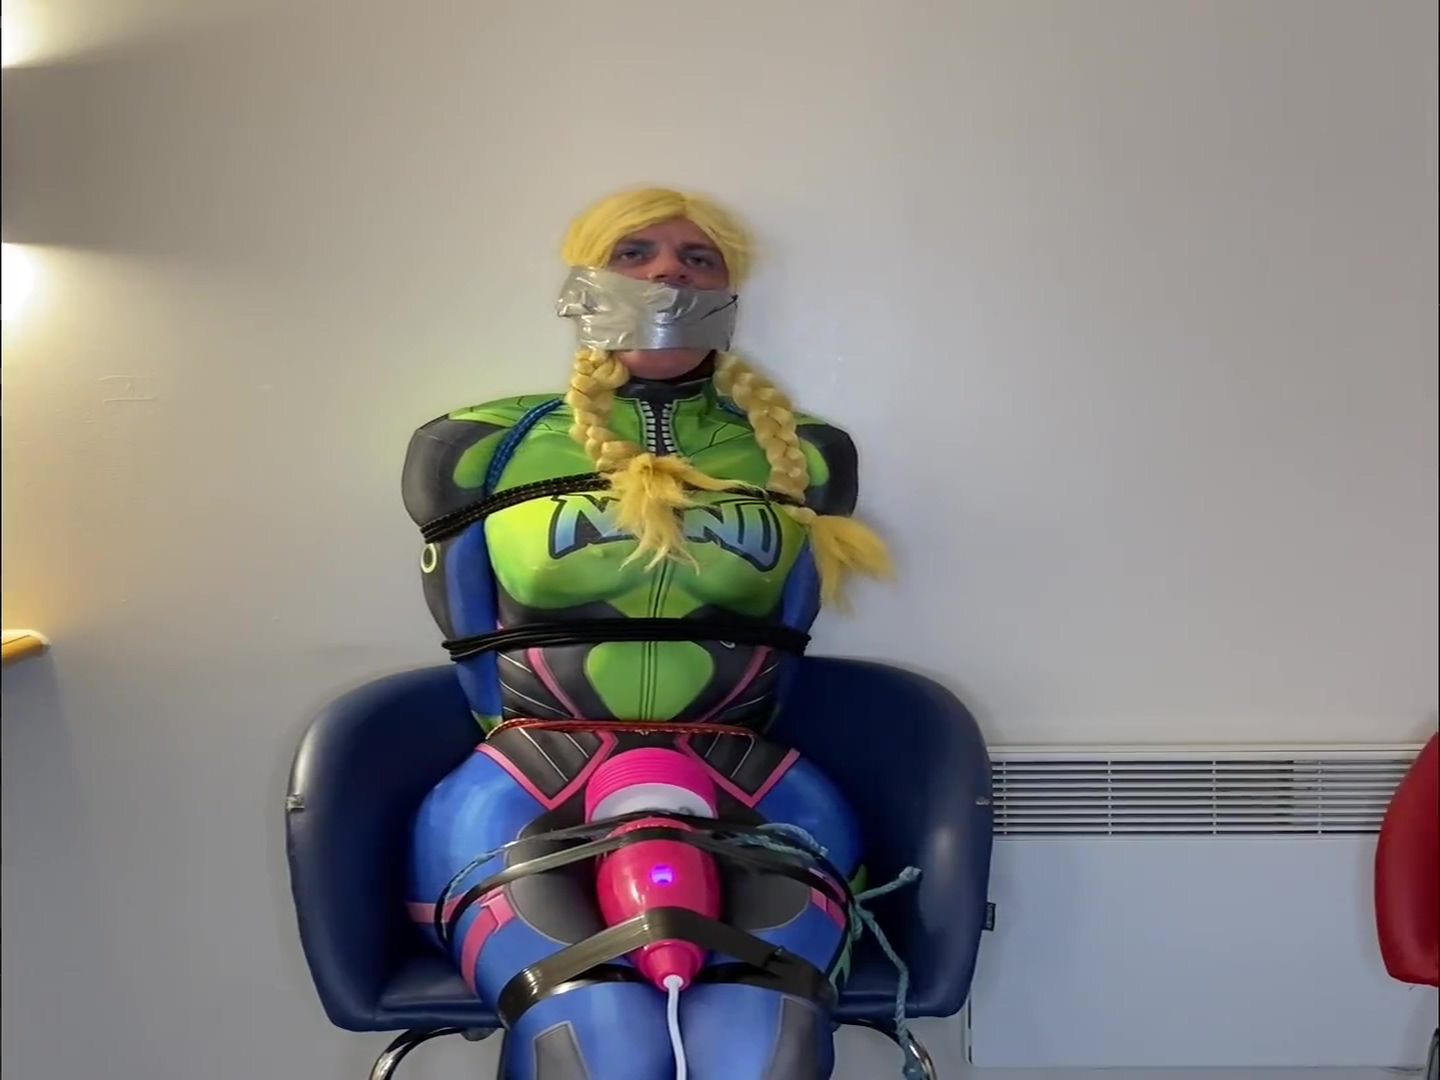 Shecock Cd Bound, Gagged And Cumming In Costume - D Va Head